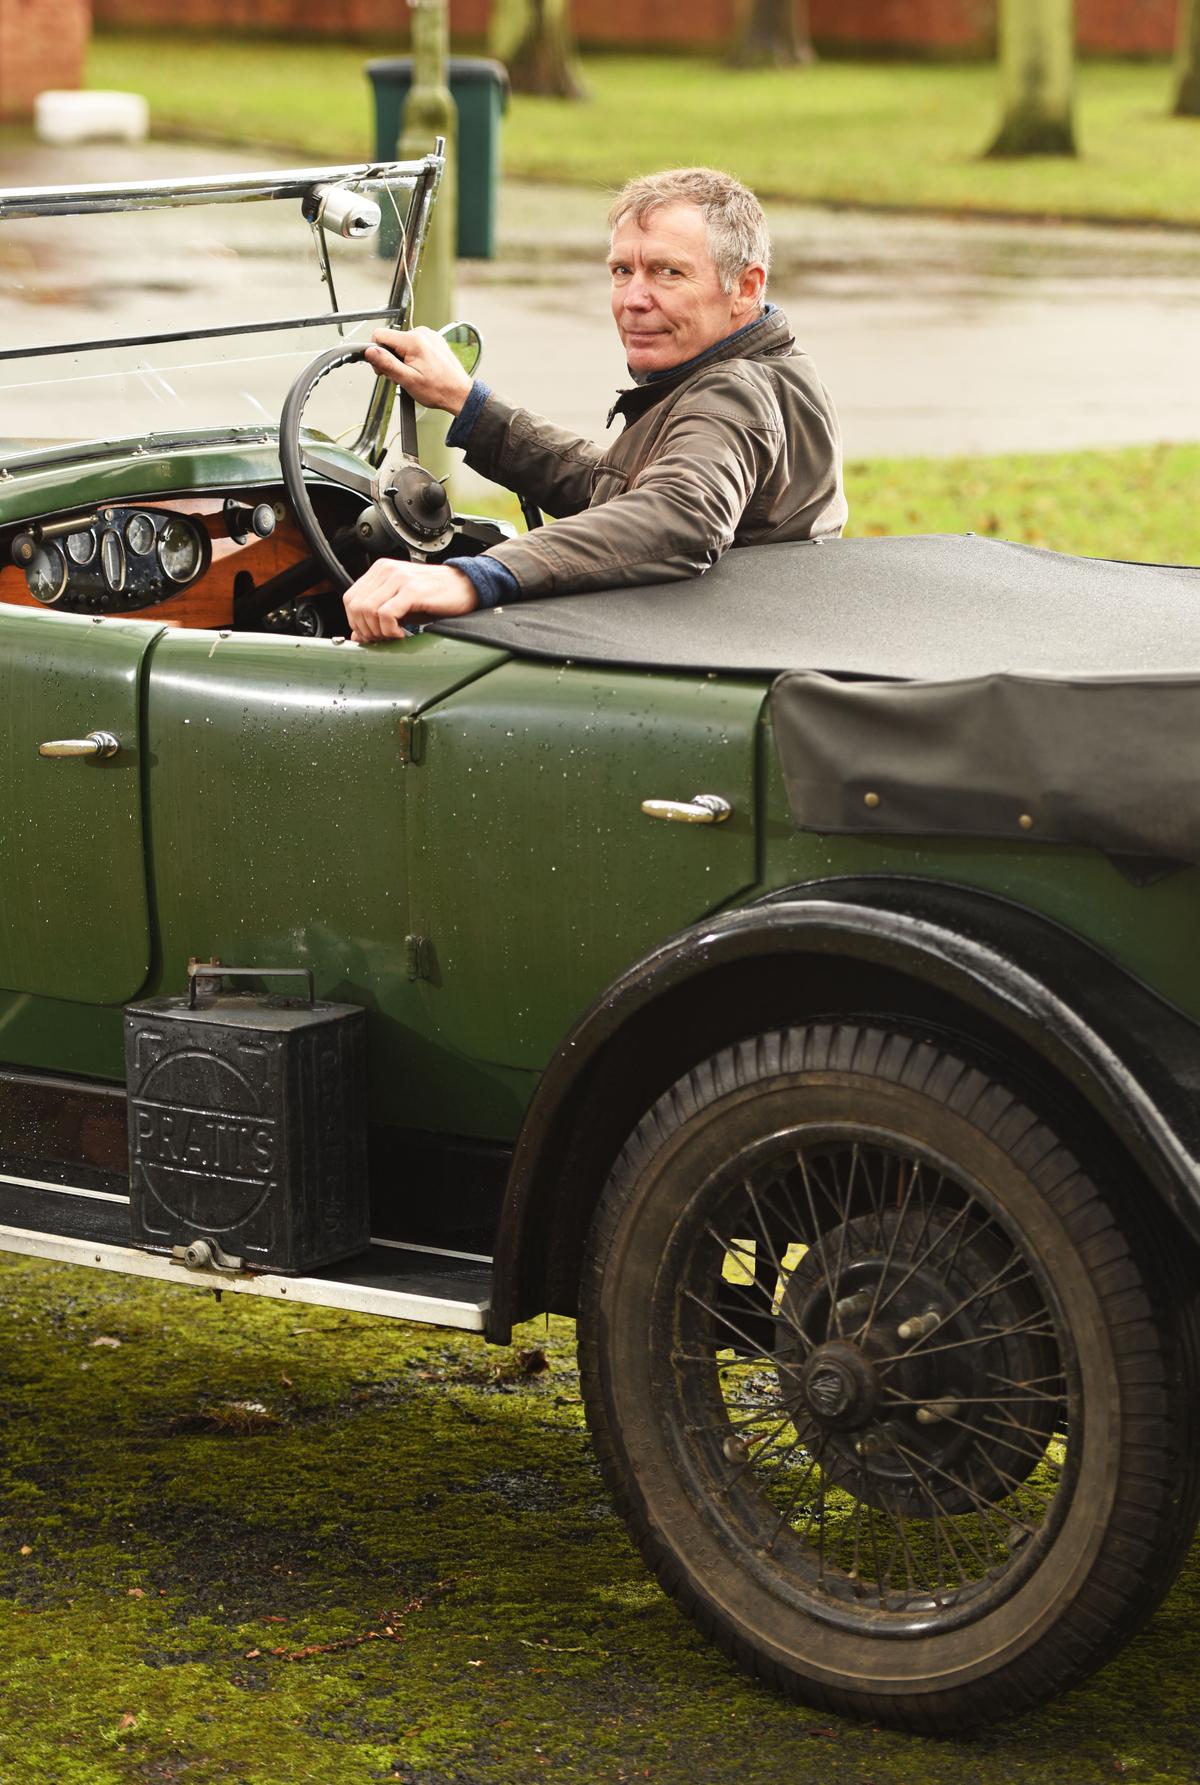 Mark poses in his 1931 Alvis. (Courtesy of Caters News)